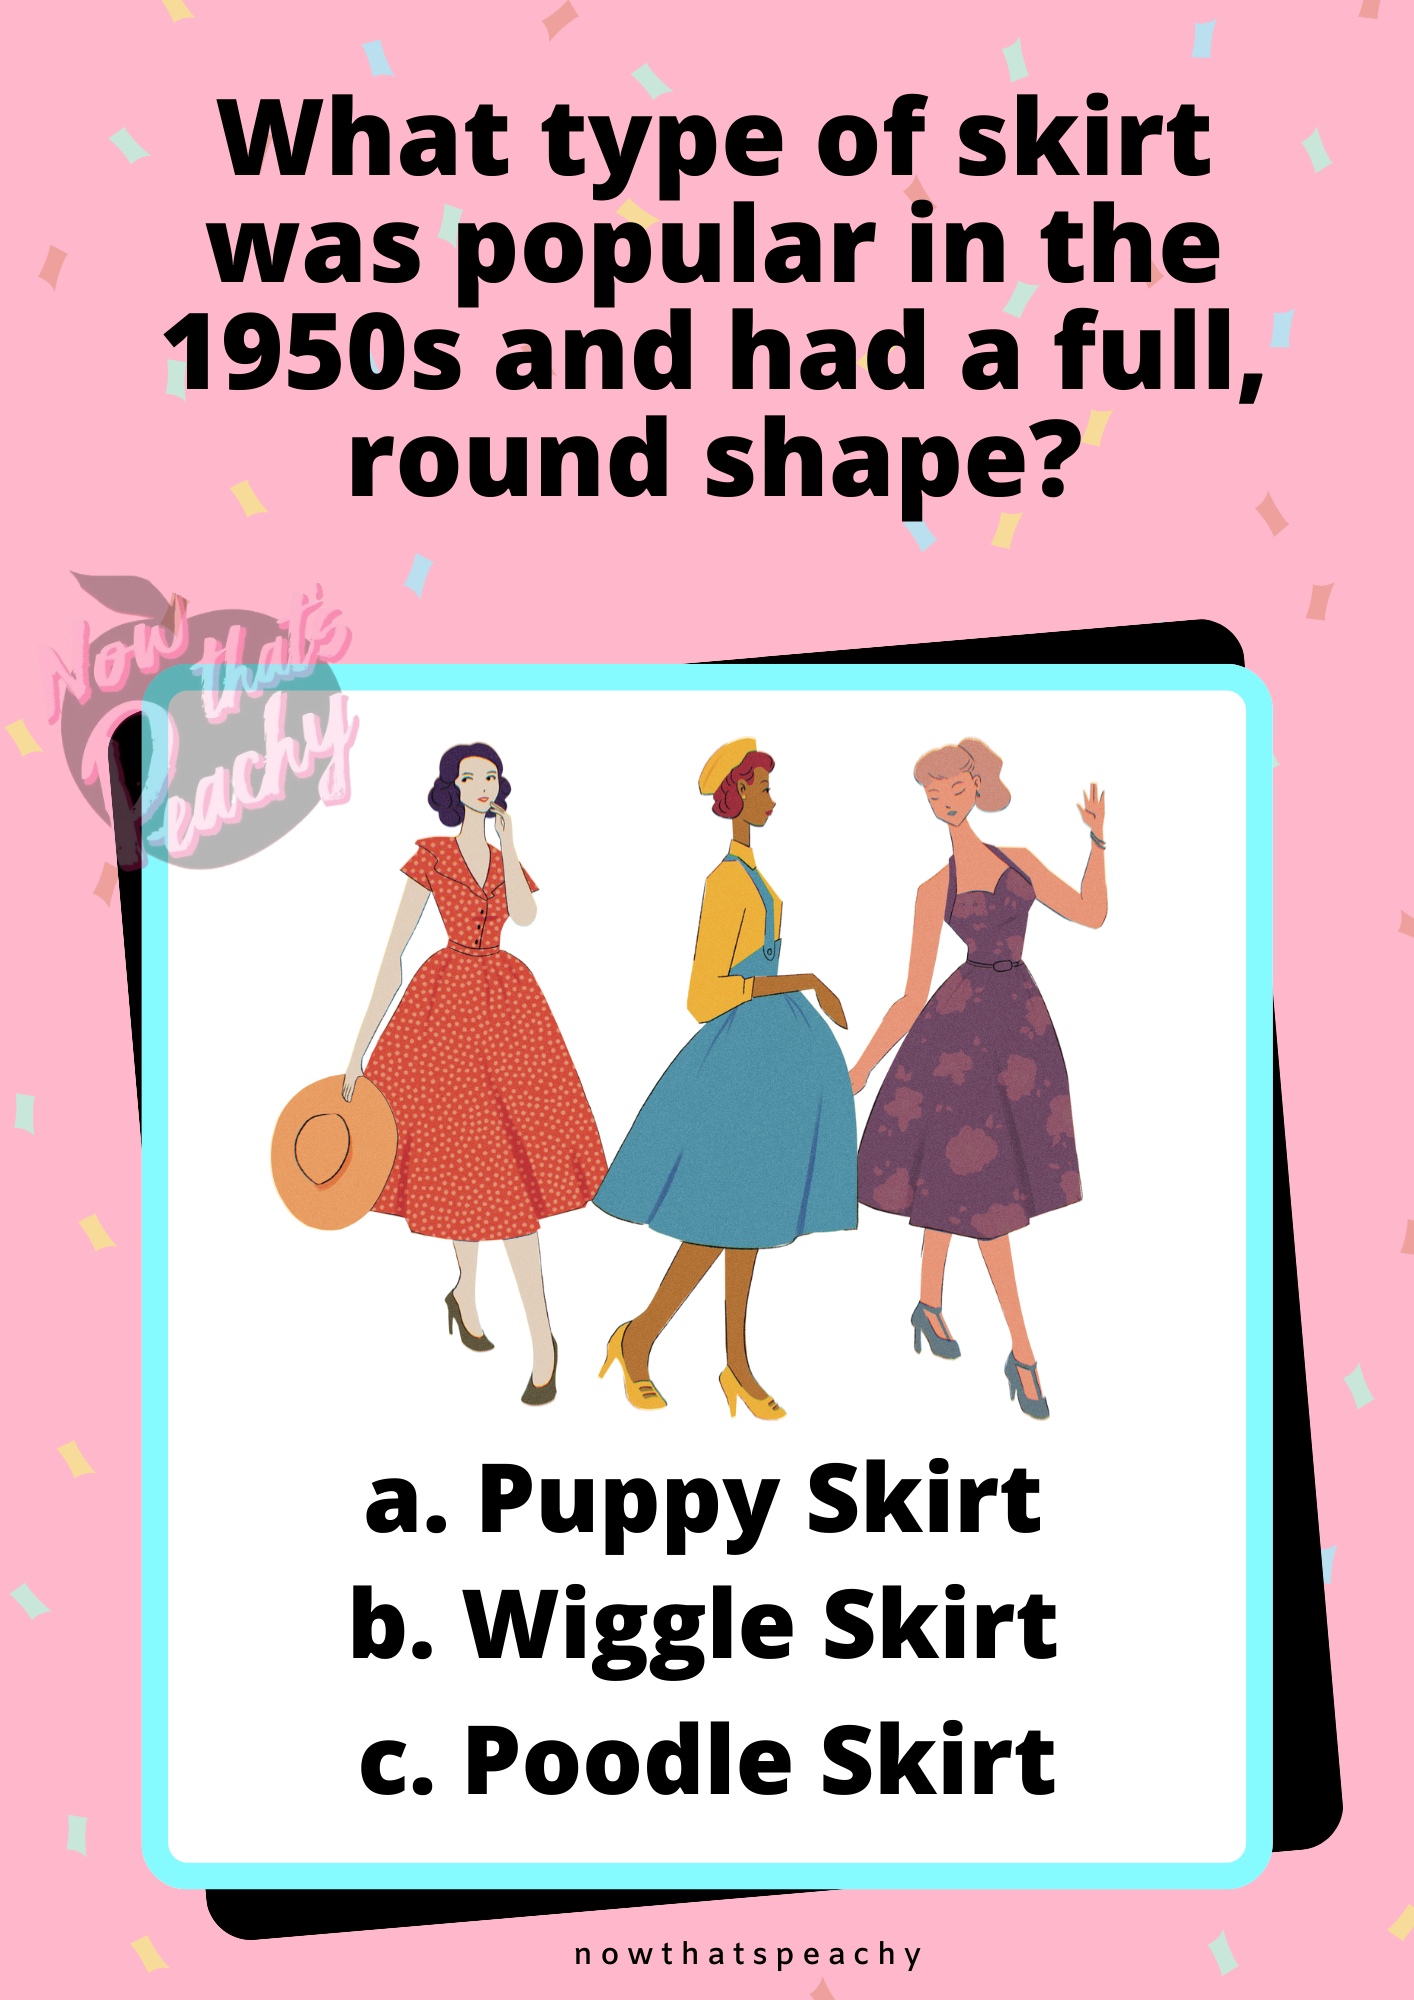 1950s fashion quiz trivia question game printable fifties diner sock hop rocknroll grease themed birthday party instant digital download print off diy fun easy nowthatspeachy 